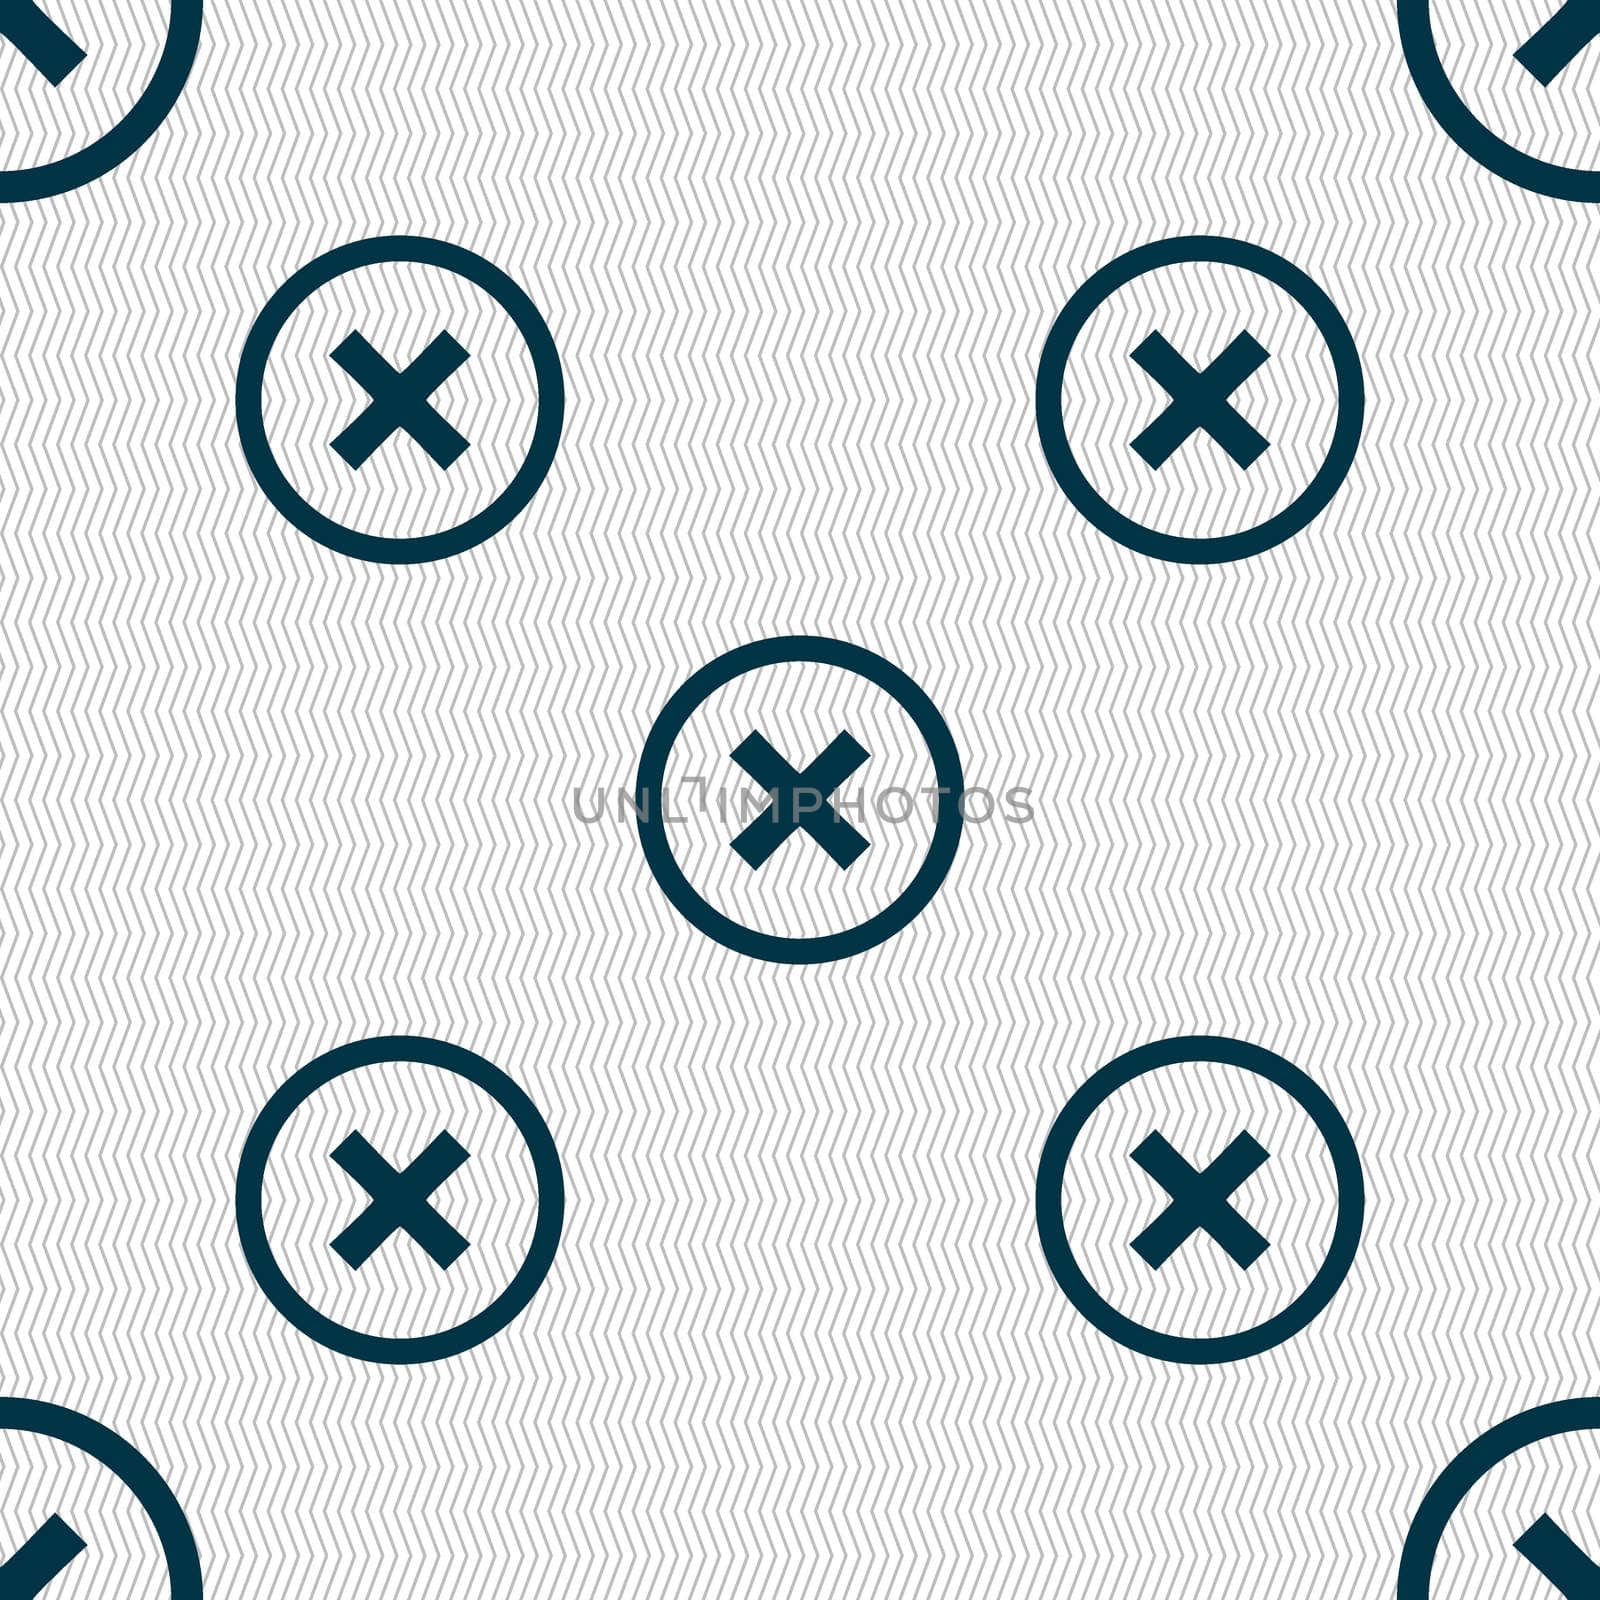 Cancel icon. no sign. Seamless abstract background with geometric shapes. illustration